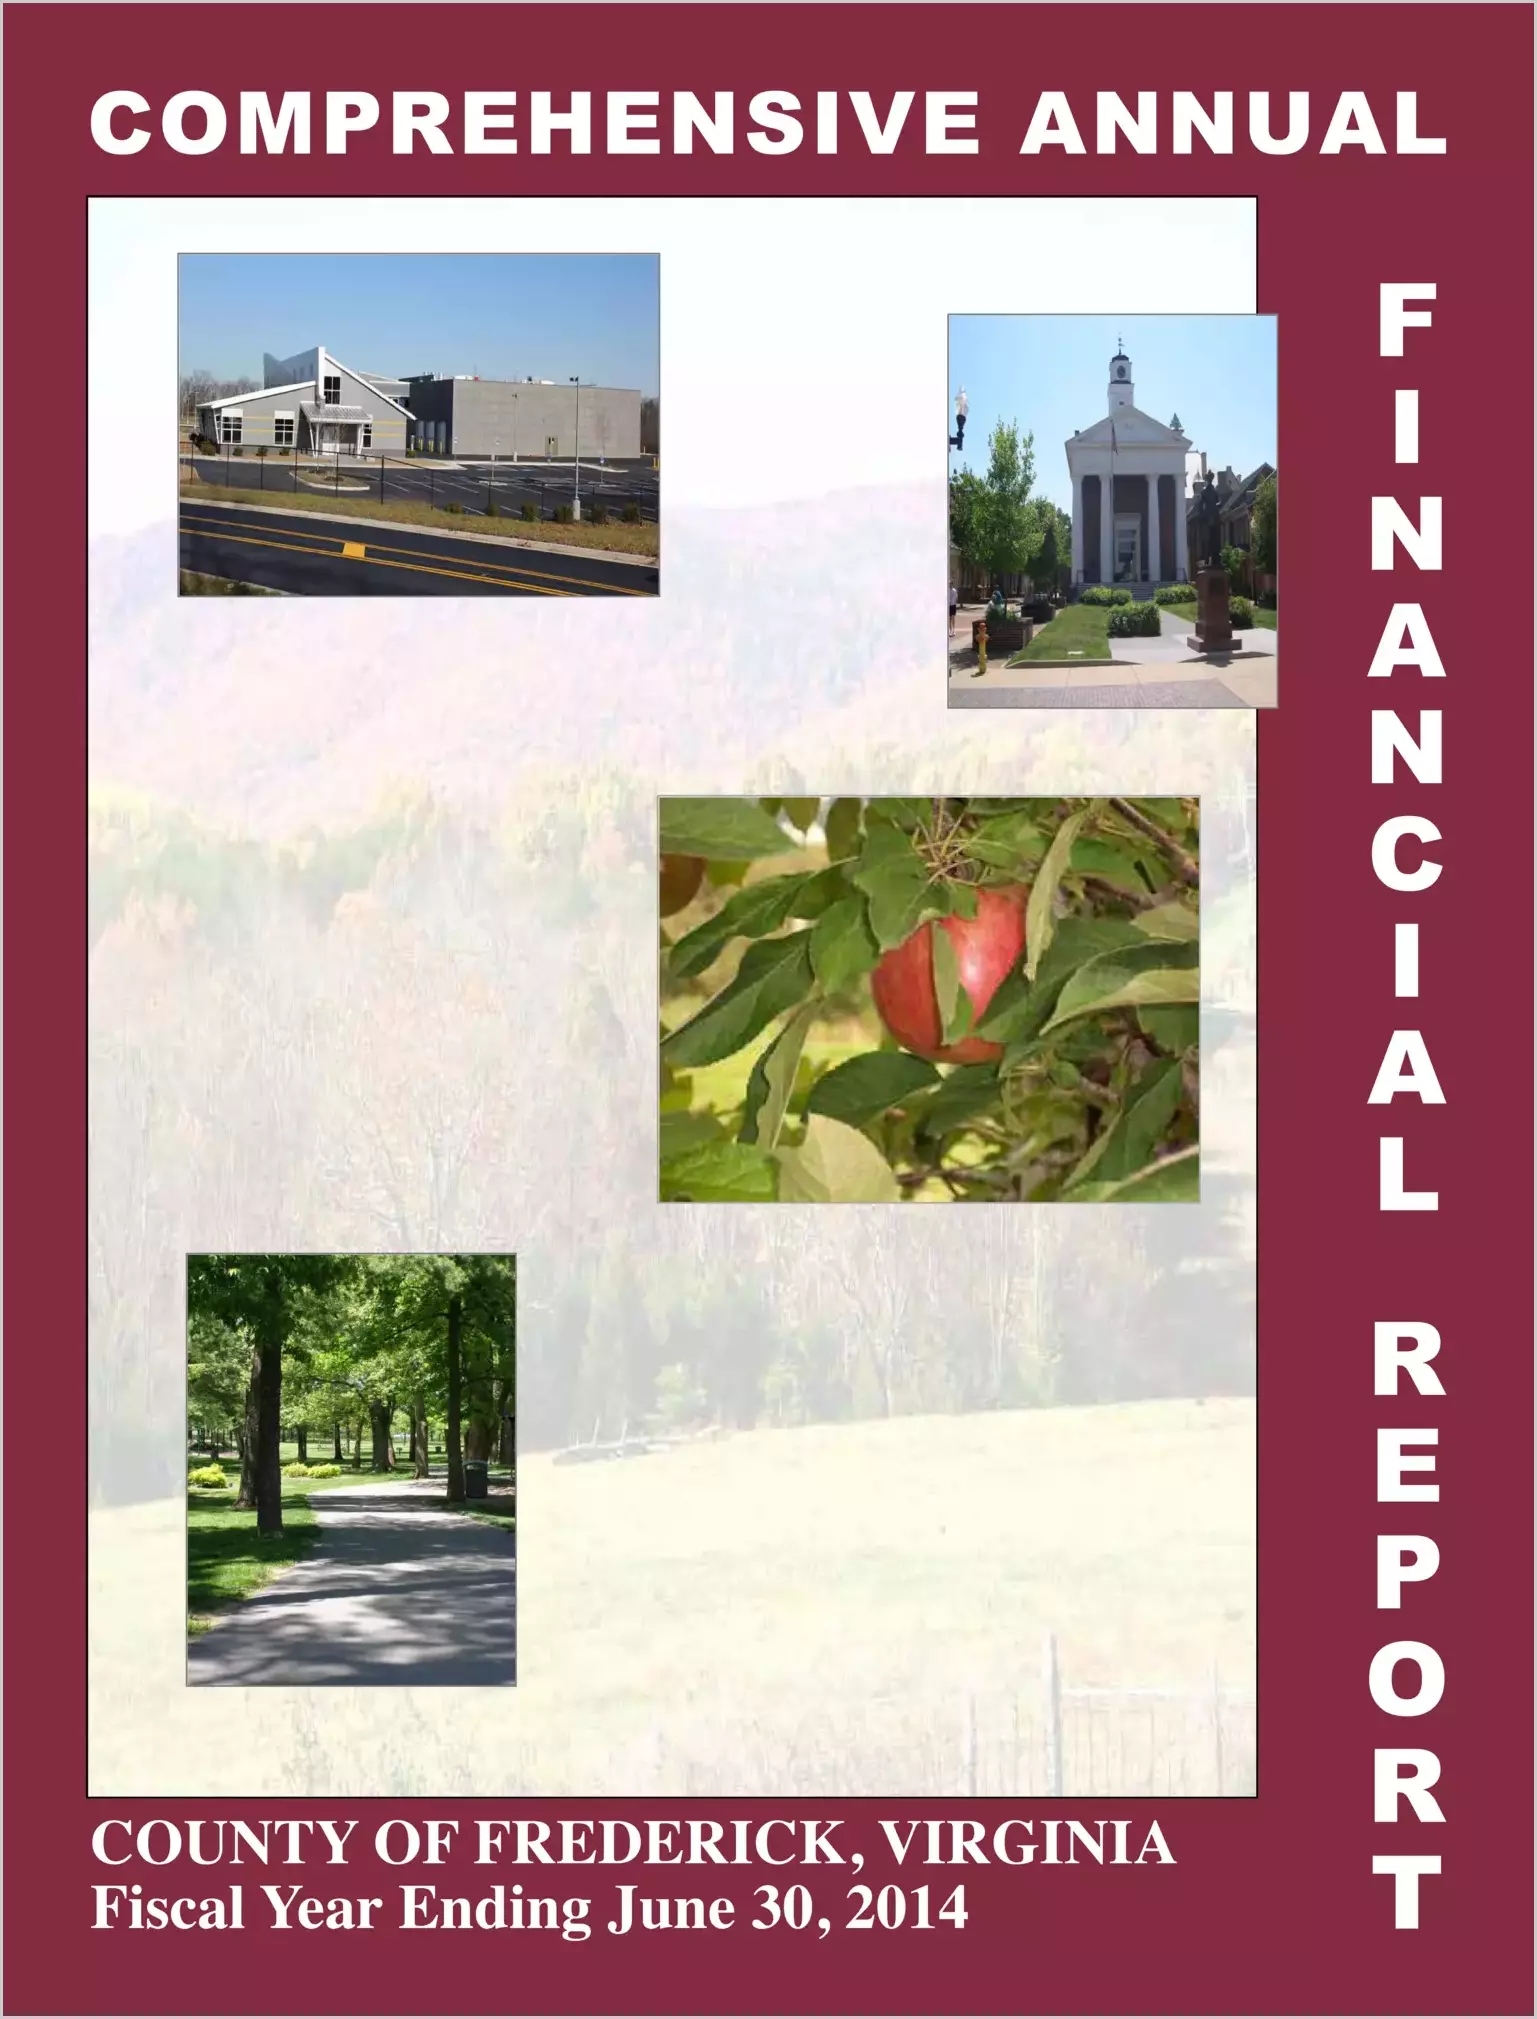 2014 Annual Financial Report for County of Frederick